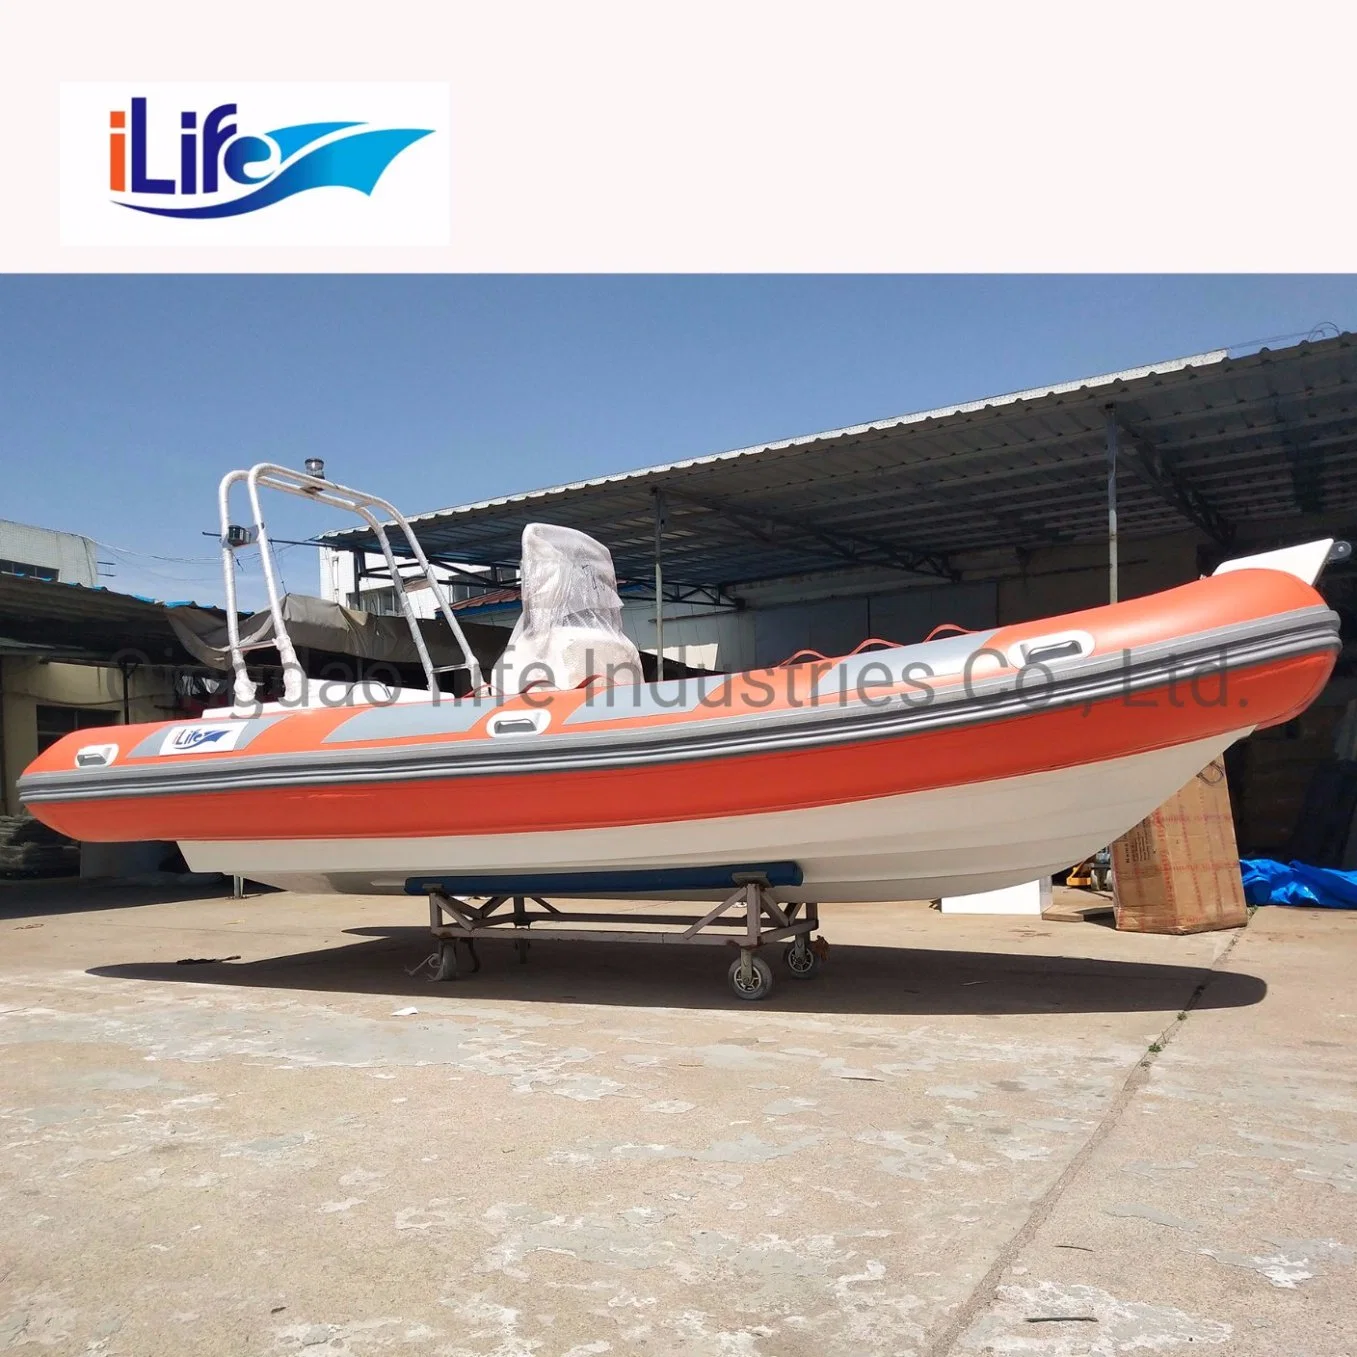 Ilife (CE) 17.7FT 5.4m 10 Persons Original Factory Rigid Fiberglass Hull Inflatable Fishing Boat for Sale